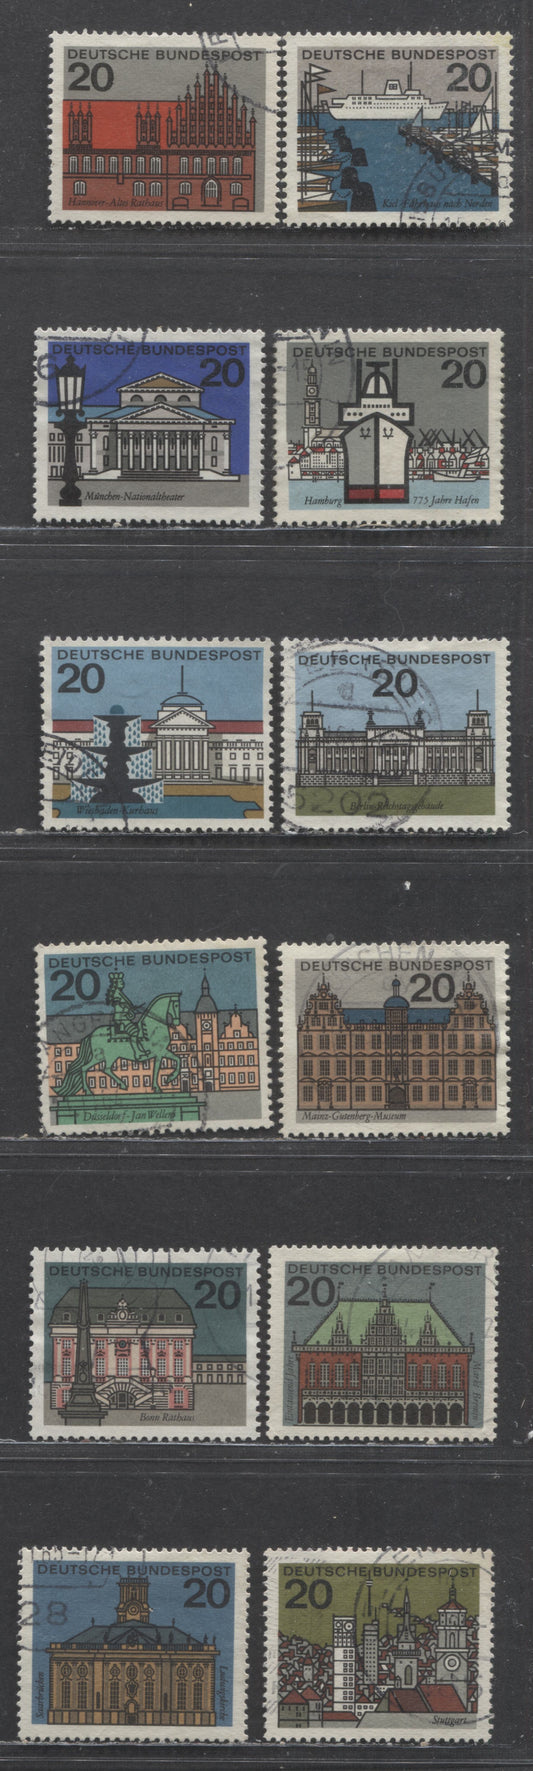 Lot 68 Germany Mi#416 (SC#869)-427 (SC#879A) 1964-1965 State Capitals Issue, 11 Very Fine Used Singles, Click on Listing to See ALL Pictures, Estimated Value $4